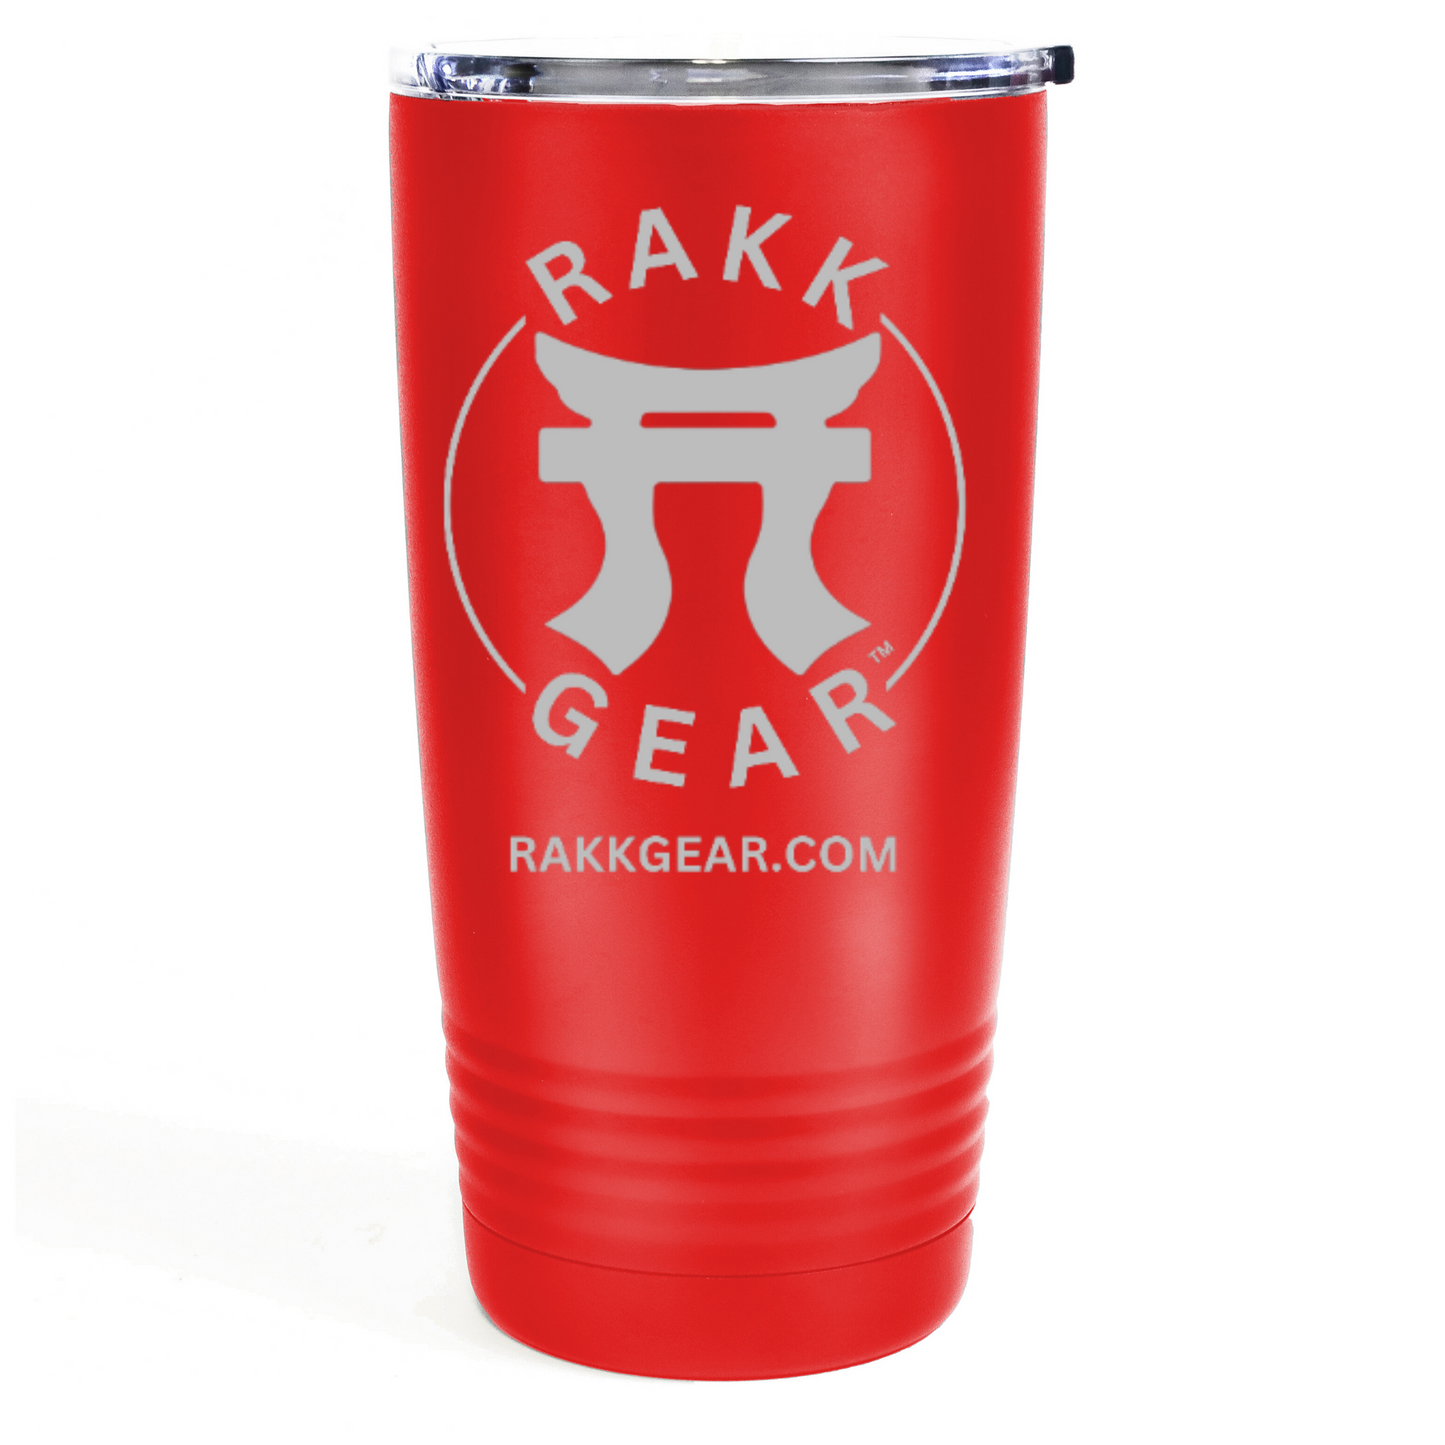 "Red Rakkgear 20oz Stainless Steel Tumbler with Laser Engraved Design."